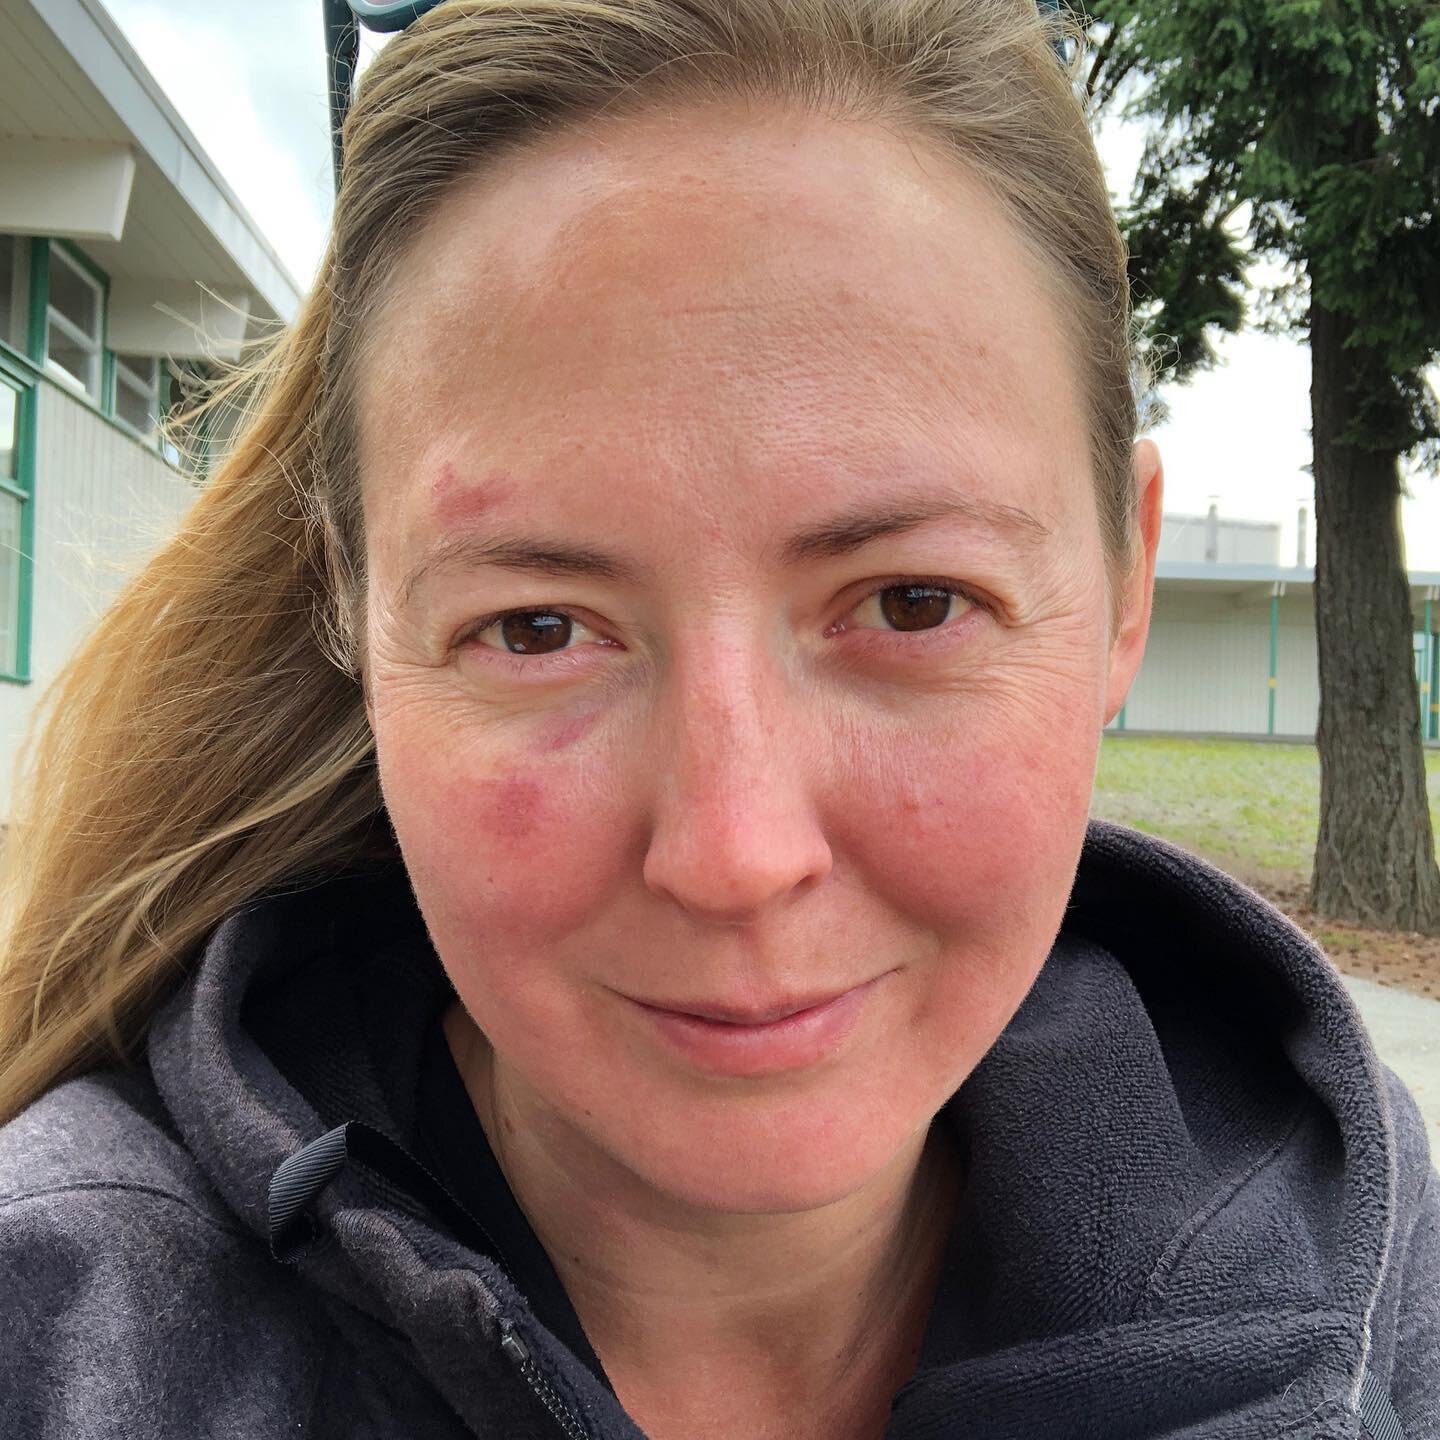 Testimony Tuesday...on a Monday!
This message came today from Kelly in Nanaimo, BC...
&ldquo;Yesterday, I tripped over my feet and the heavy backpack I was wearing drove my face straight into the ground. Luckily I had our first aid kit with some Heal